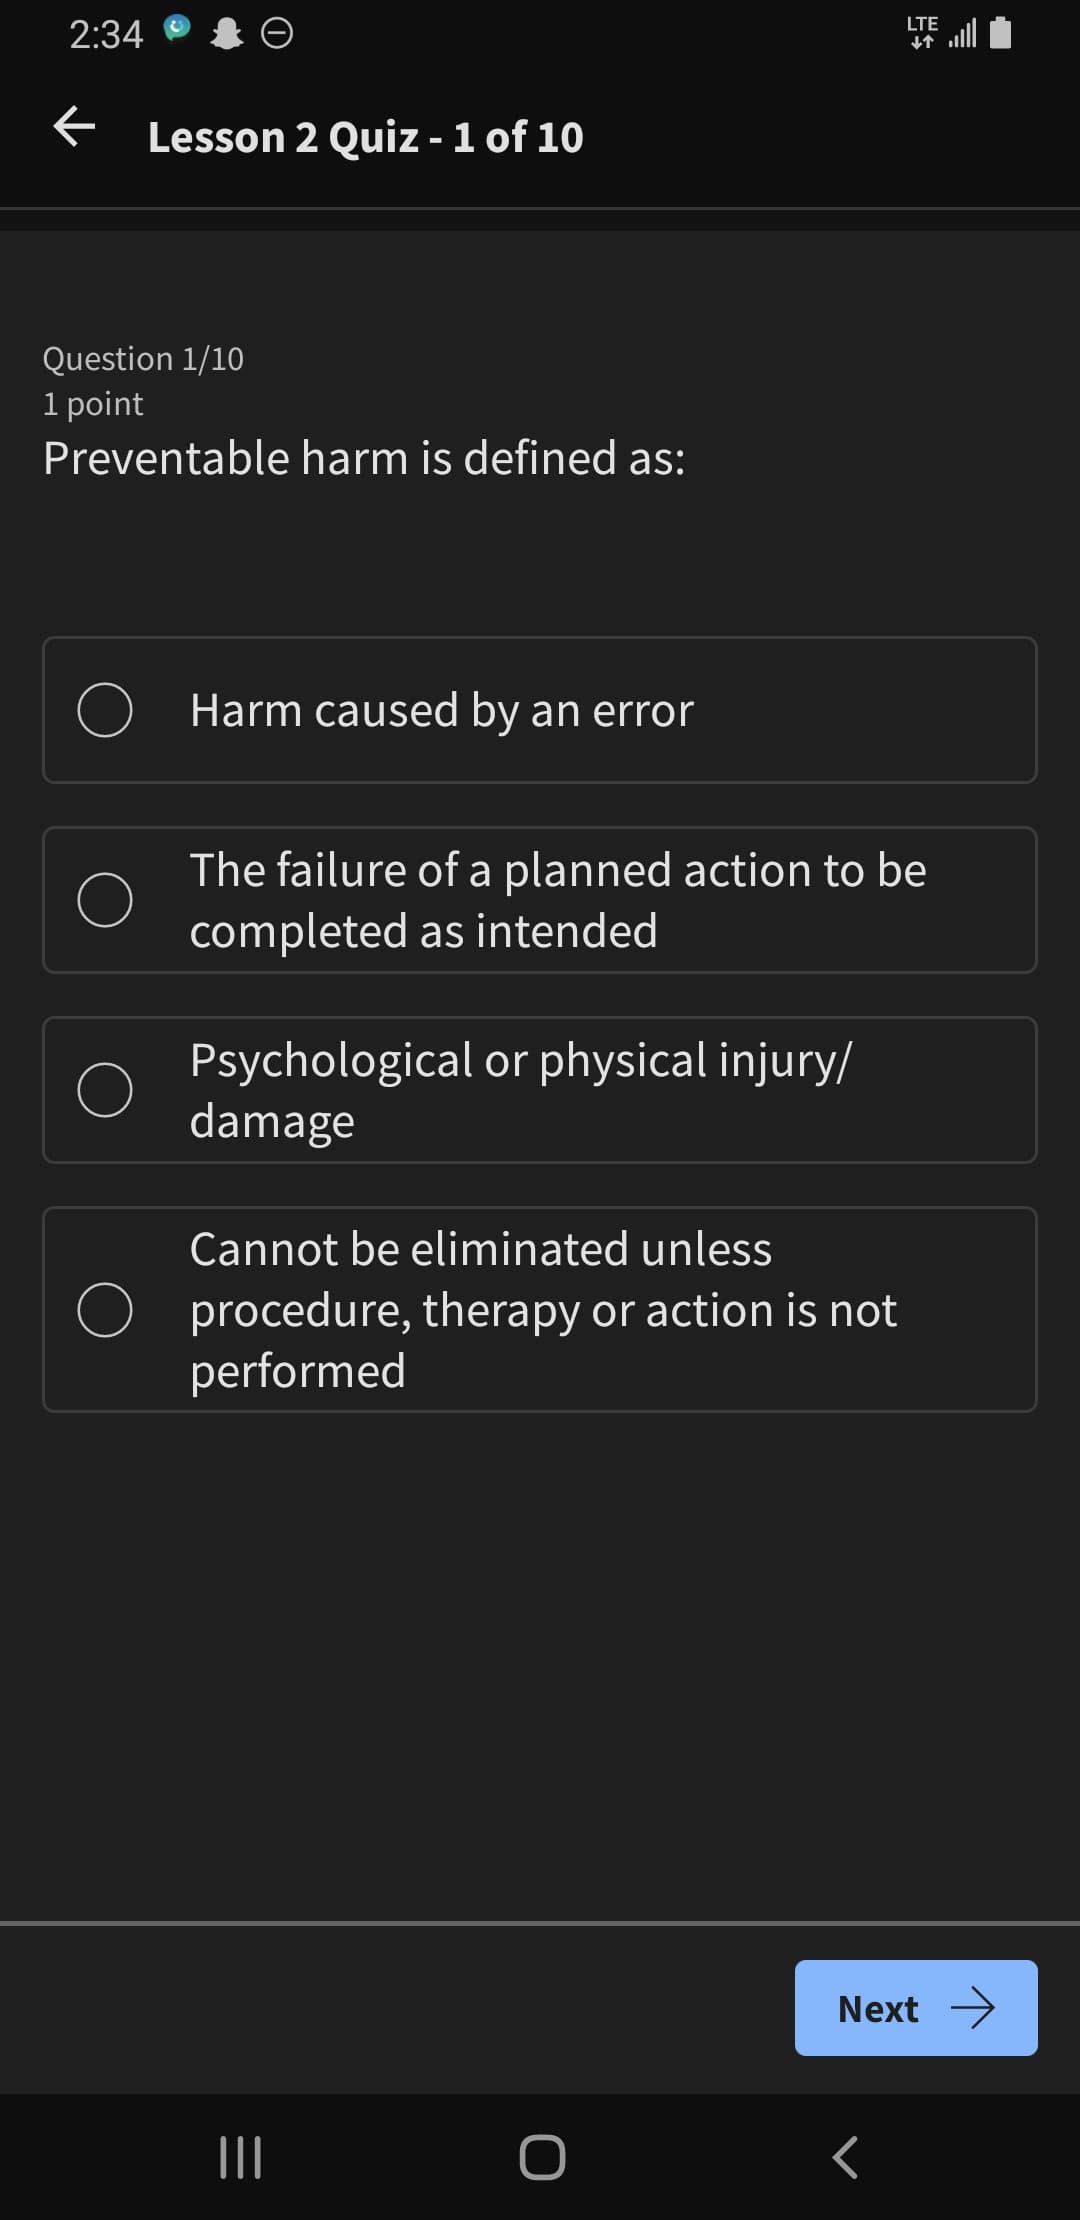 2:34
←
Lesson 2 Quiz - 1 of 10
Question 1/10
1 point
Preventable harm is defined as:
LTE
个
Harm caused by an error
The failure of a planned action to be
completed as intended
Psychological or physical injury/
damage
Cannot be eliminated unless
procedure, therapy or action is not
performed
Next →
|||
O
<